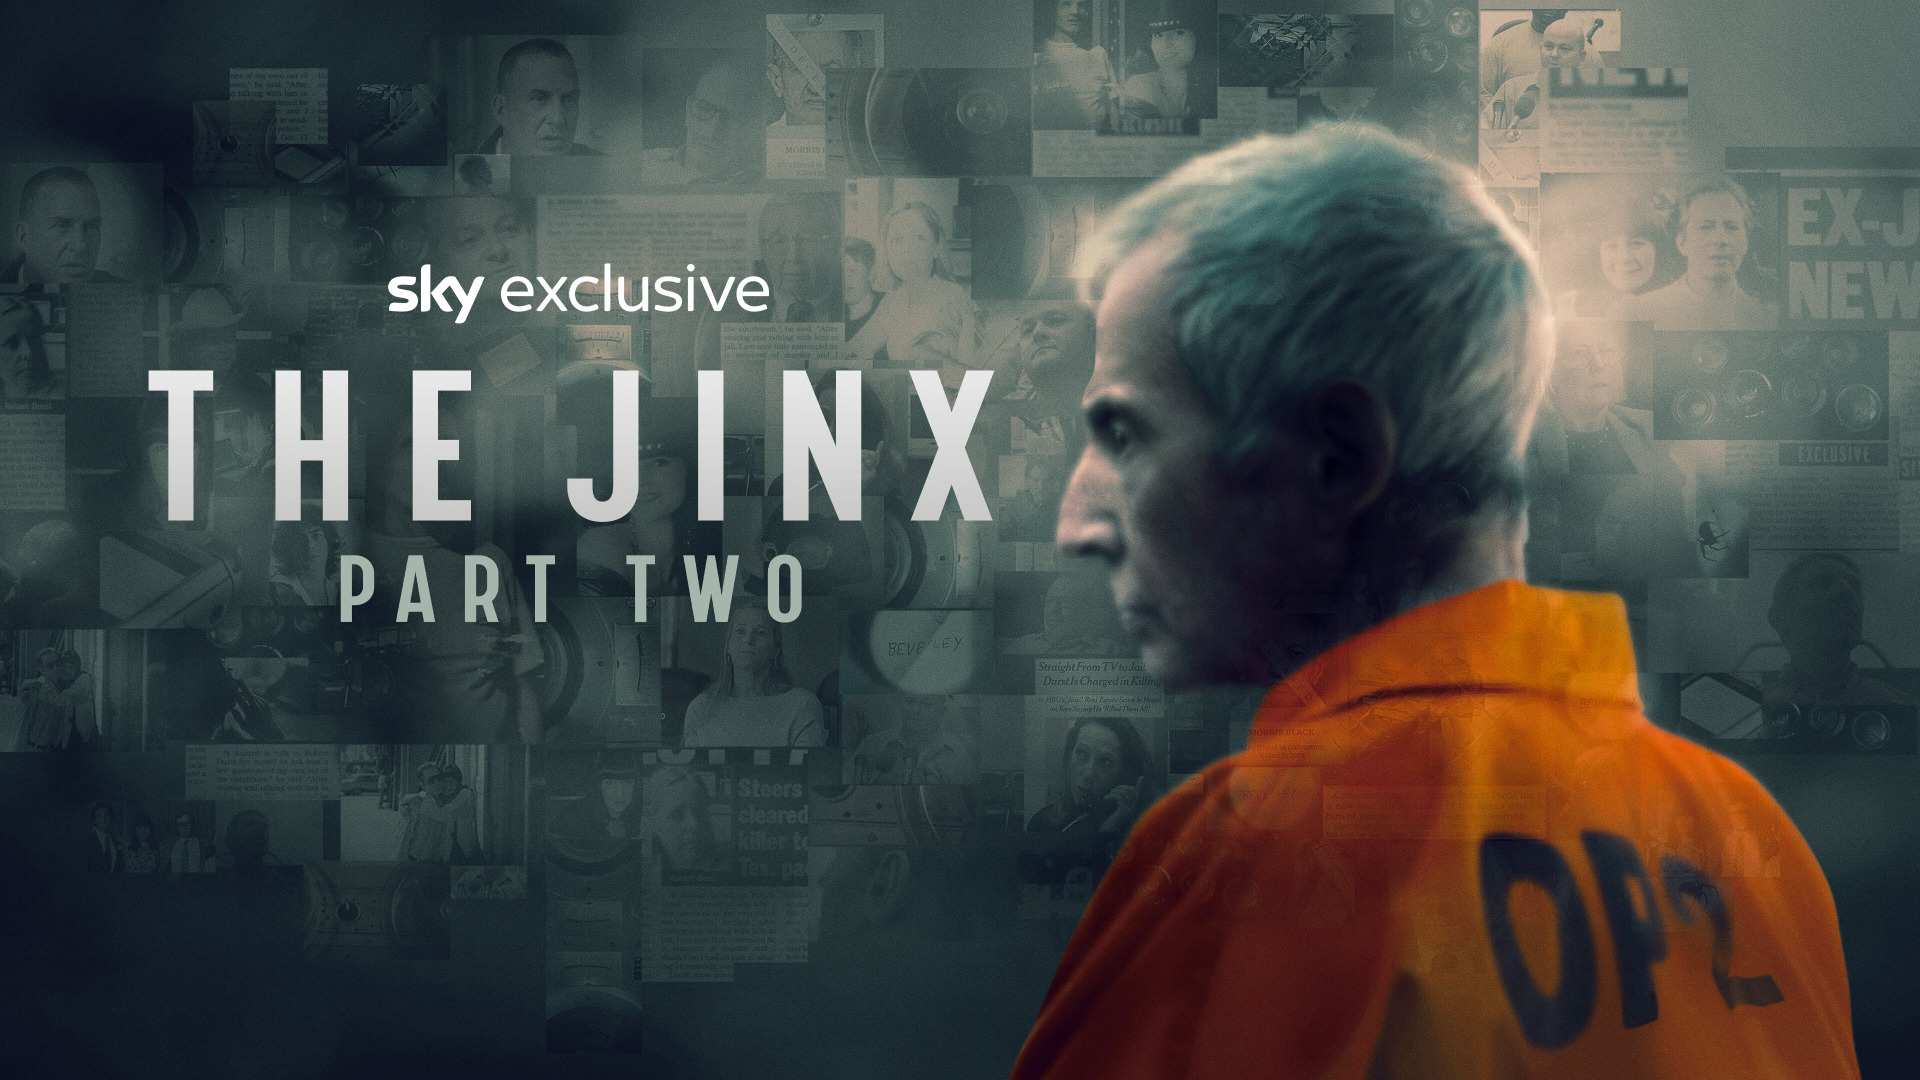 Show The Jinx - Part Two